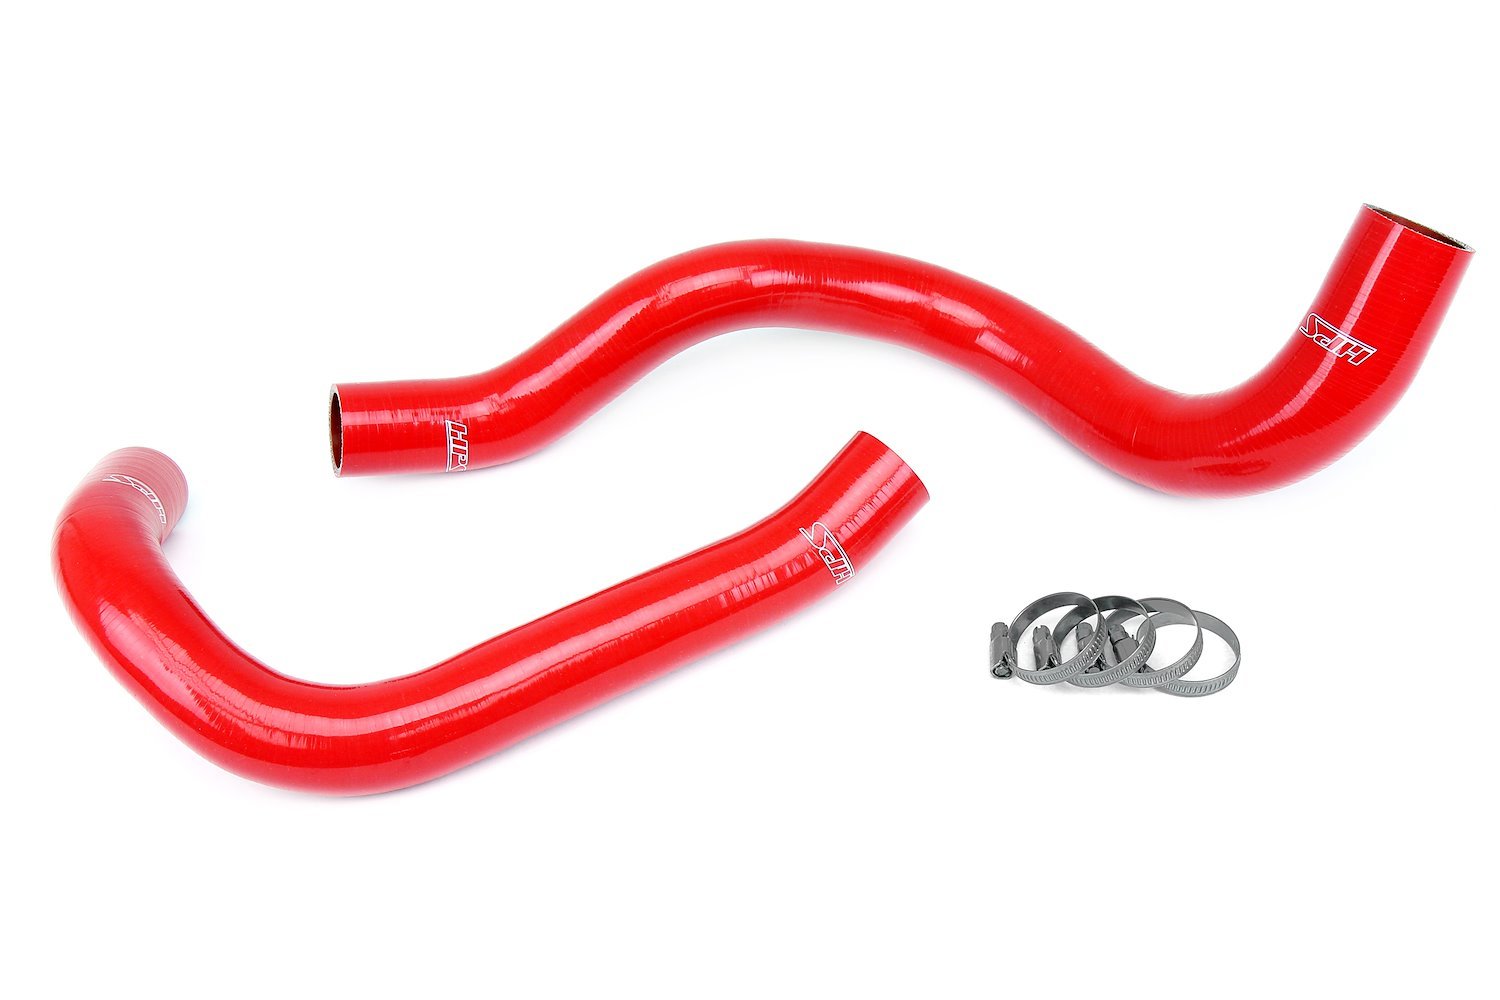 57-1834-RED Radiator Hose Kit, 3-Ply Reinforced Silicone, Replaces Rubber Radiator Coolant Hoses